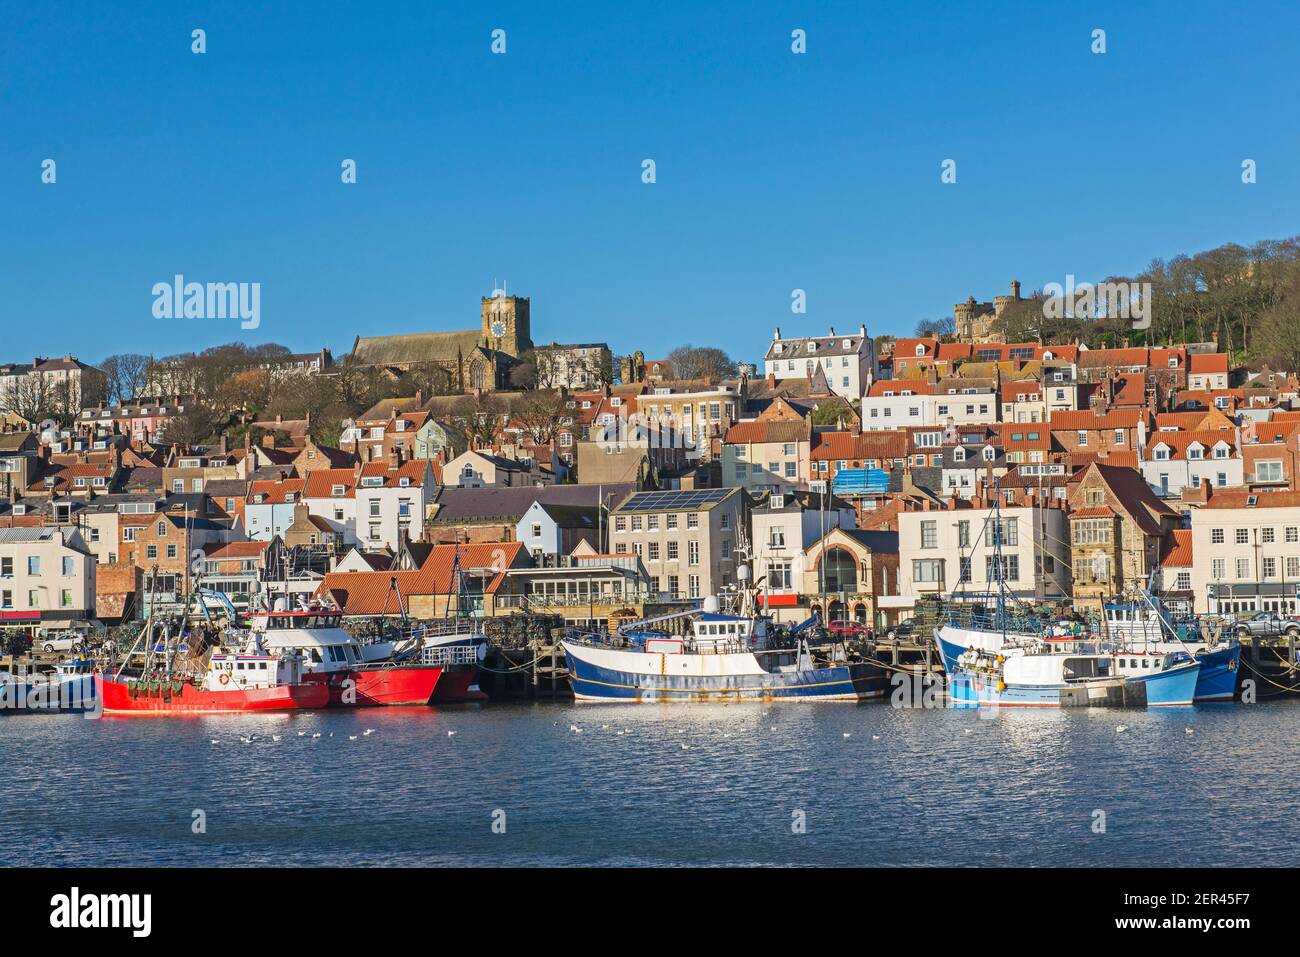 Landscape panorama view of coastal seaside town harbor front with medieval church on hill and fishing boats Stock Photo